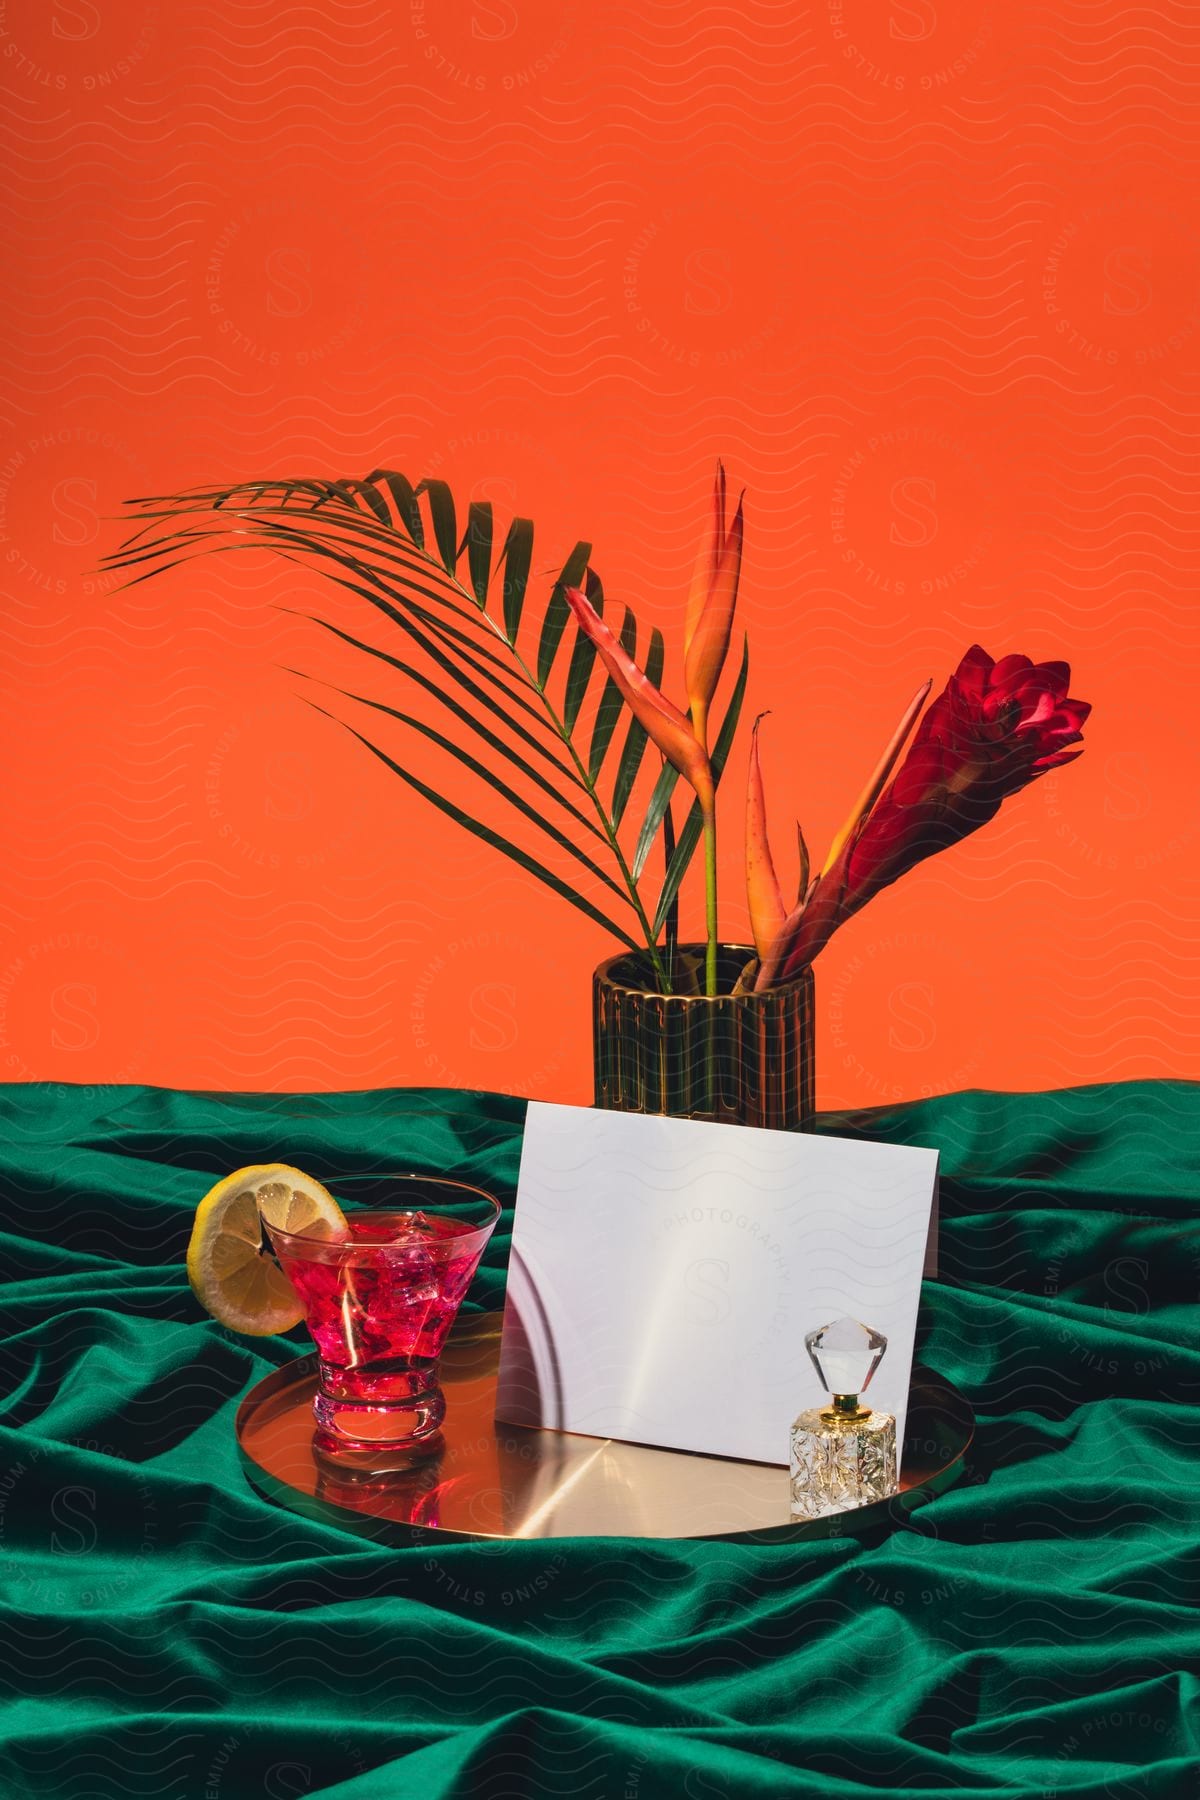 A pink cocktail sits on a tray with a bottle of perfume and a letter. Behind is a vase with flowers.